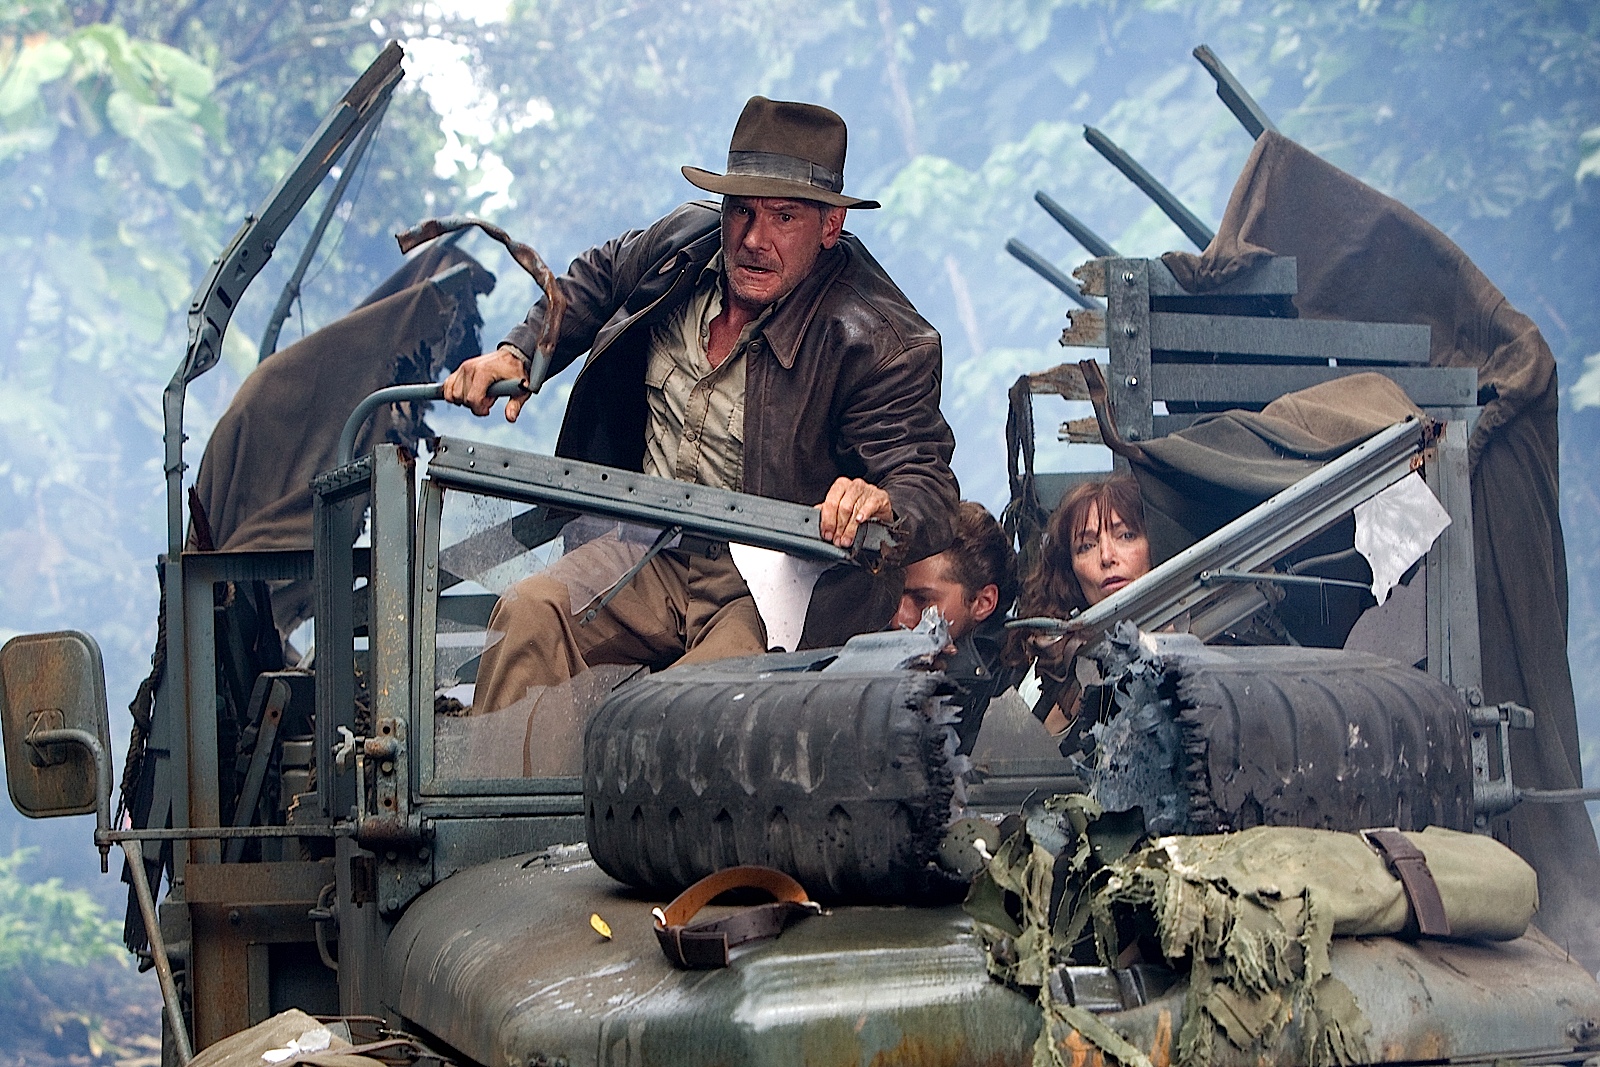 Geek insider, geekinsider, geekinsider. Com,, indiana jones and the push for a fifth film, entertainment